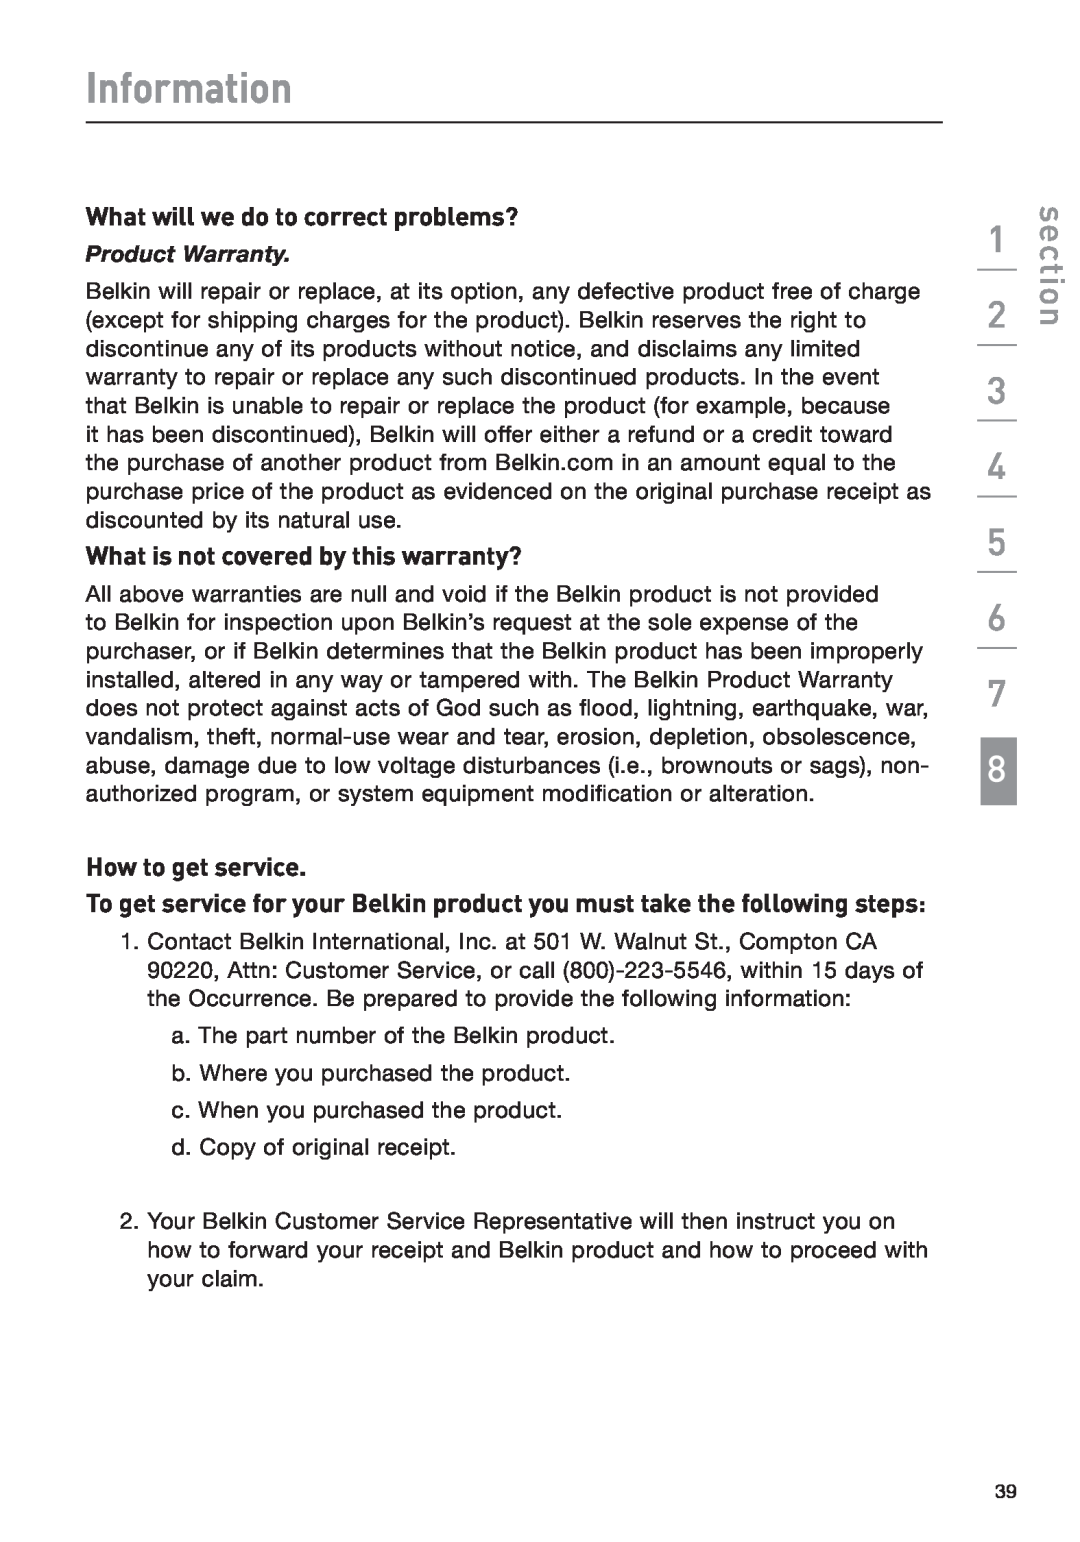 Belkin F1DA208Z manual Information, What will we do to correct problems?, What is not covered by this warranty?, section 